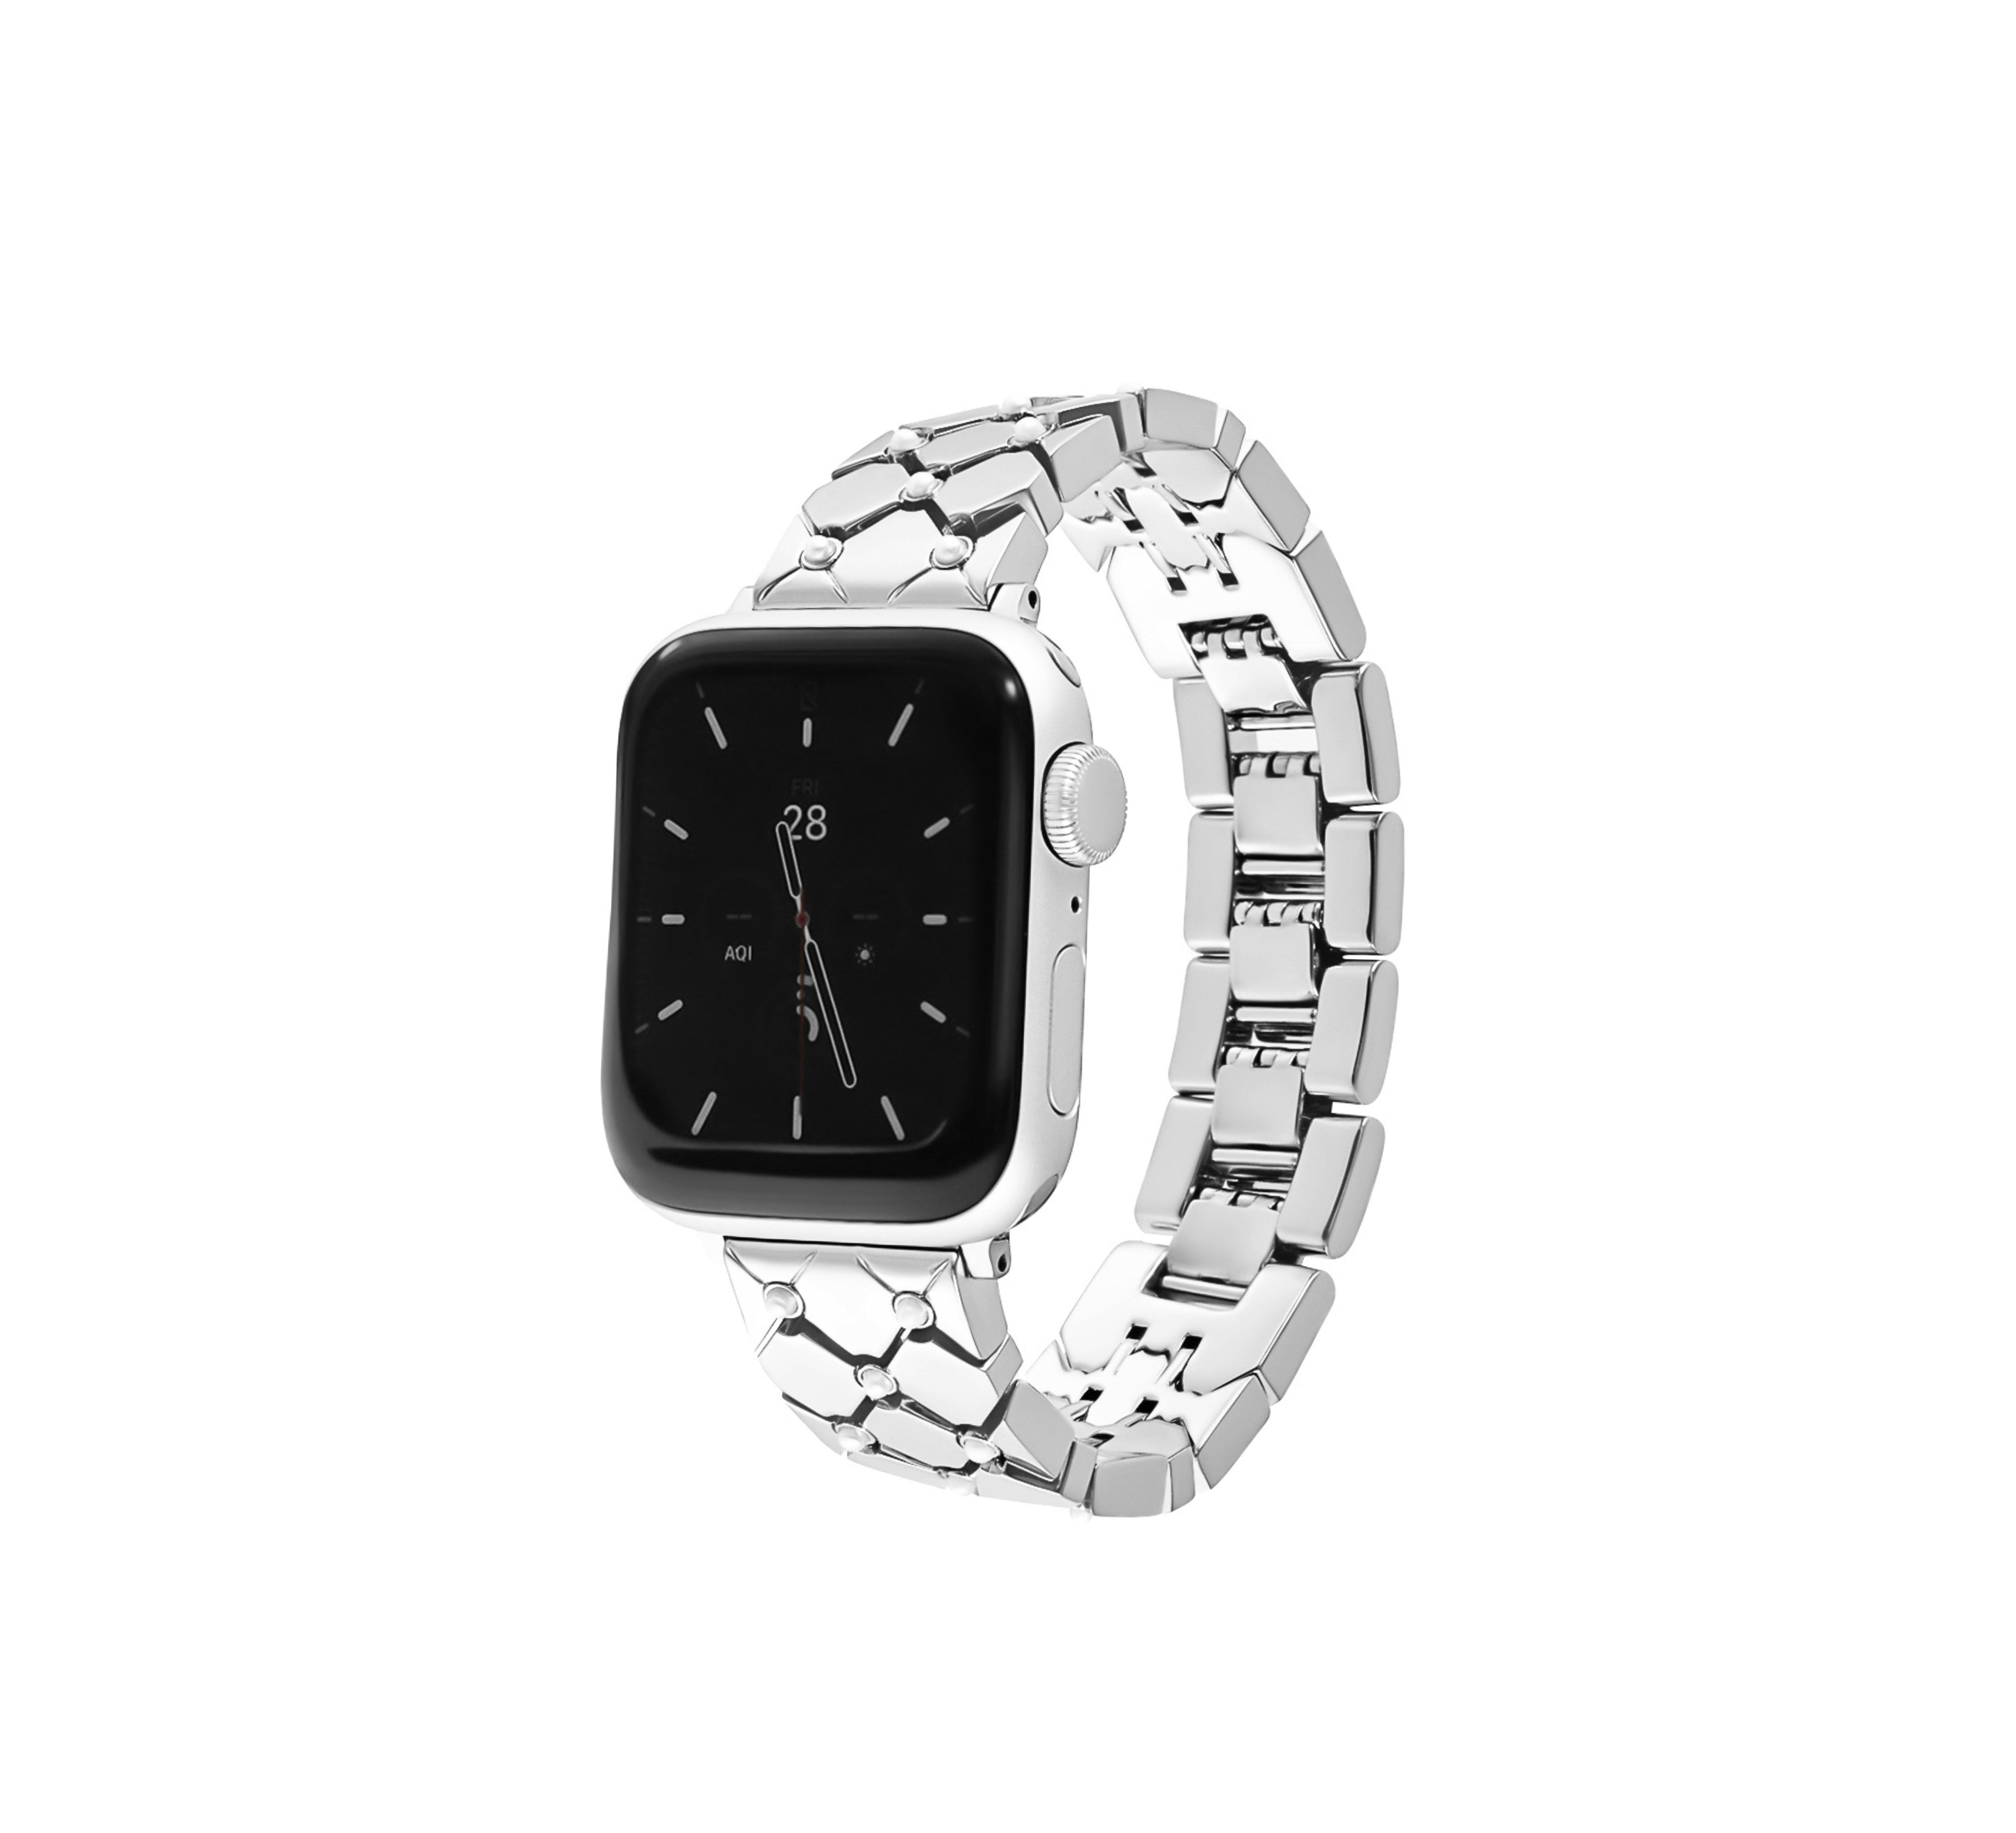 Pearl Band for the Apple Watch - Goldenerre Women's Apple Watch Bands and Jewelry